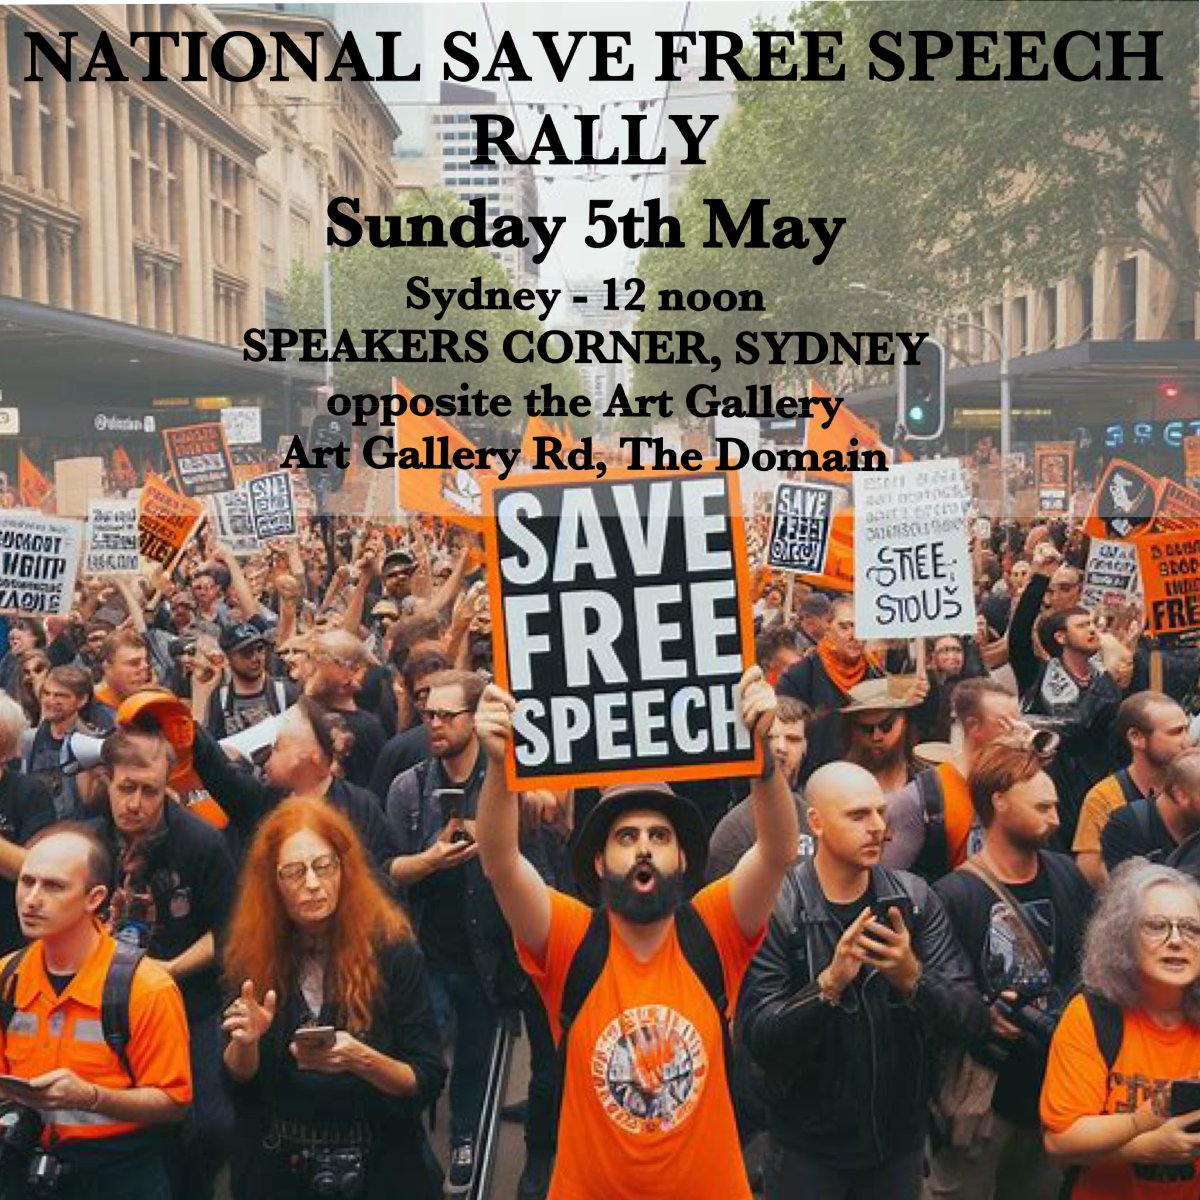 National Rally to Protect Free Speech is conmbining with NO Digital ID Rally for one maaive rally Sunday 5th May in all capital cities. The Sydney Rally will be held at Australia’s symbolic home of free speech and free expression. Speakers Corner opposite the Art Gallery Art…